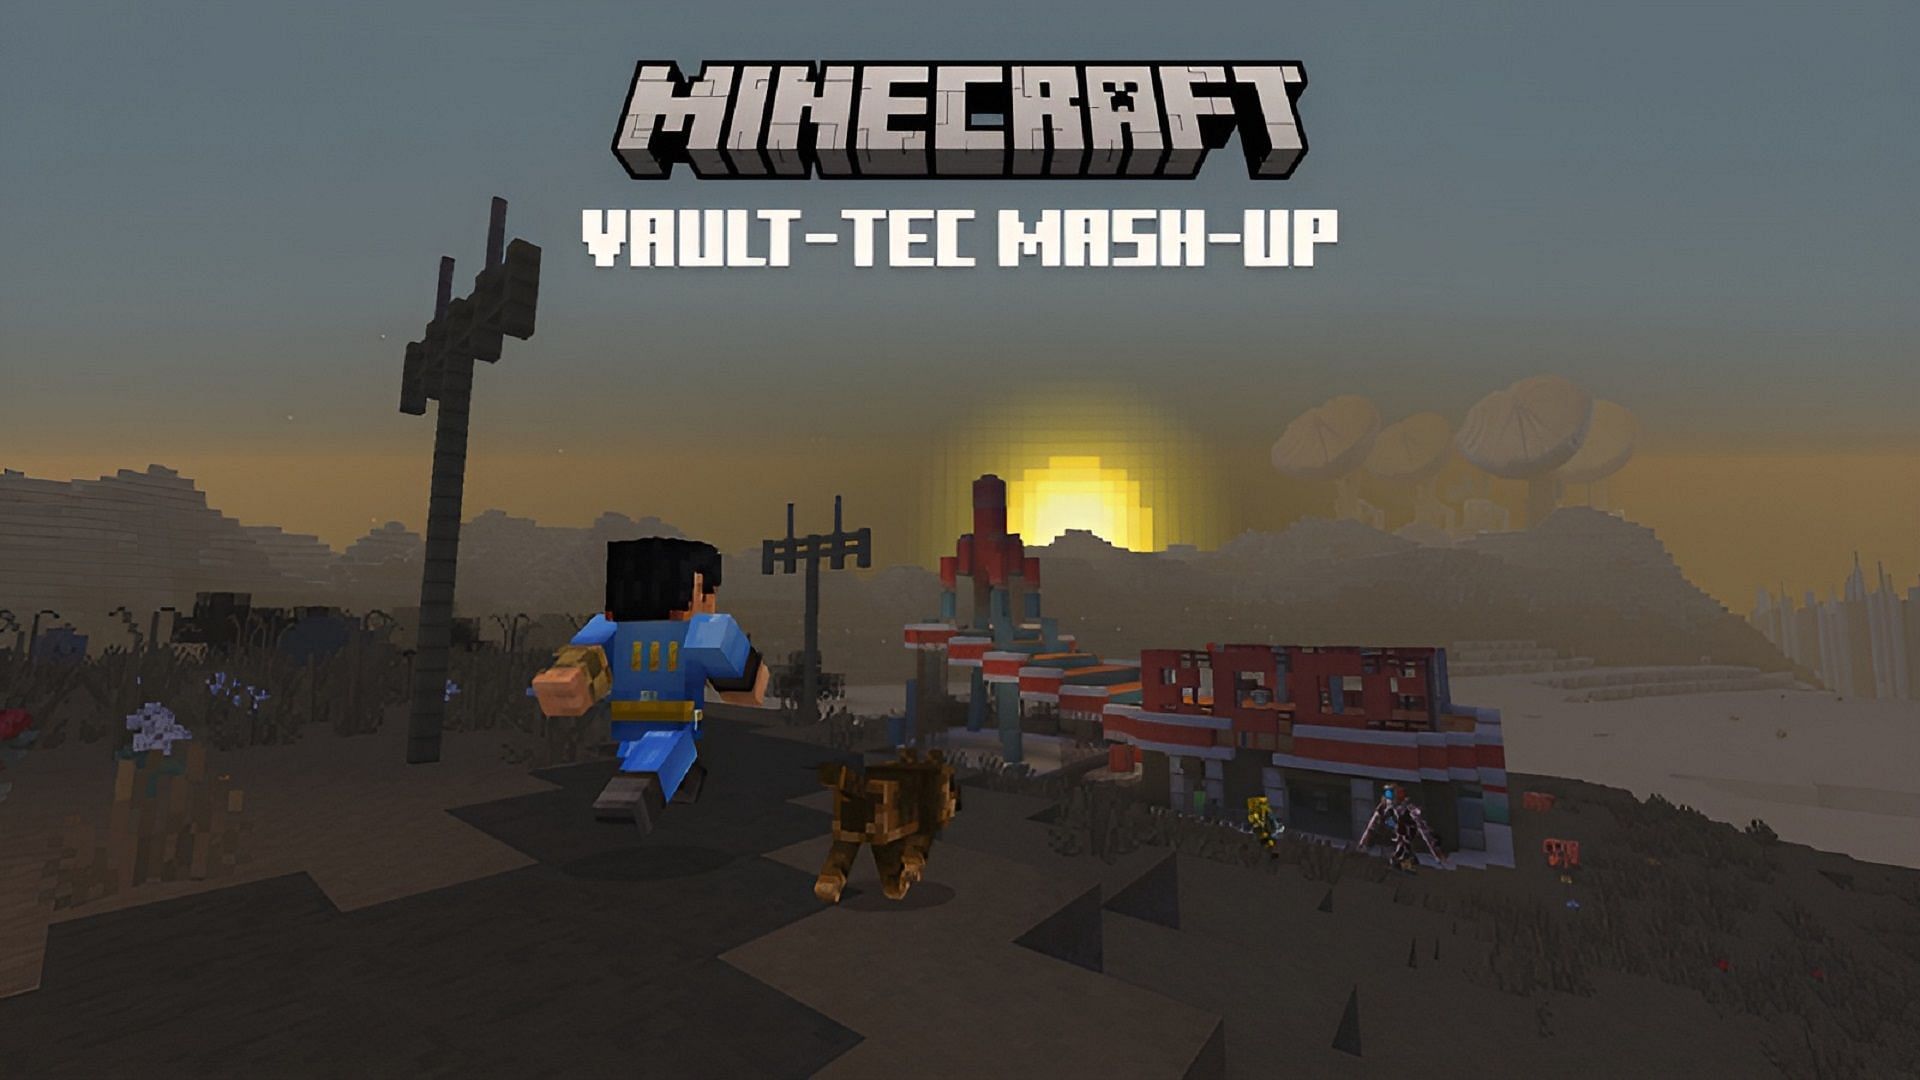 Enter the wasteland in this Fallout-themed Minecraft DLC (Image via Mojang/Bethesda)